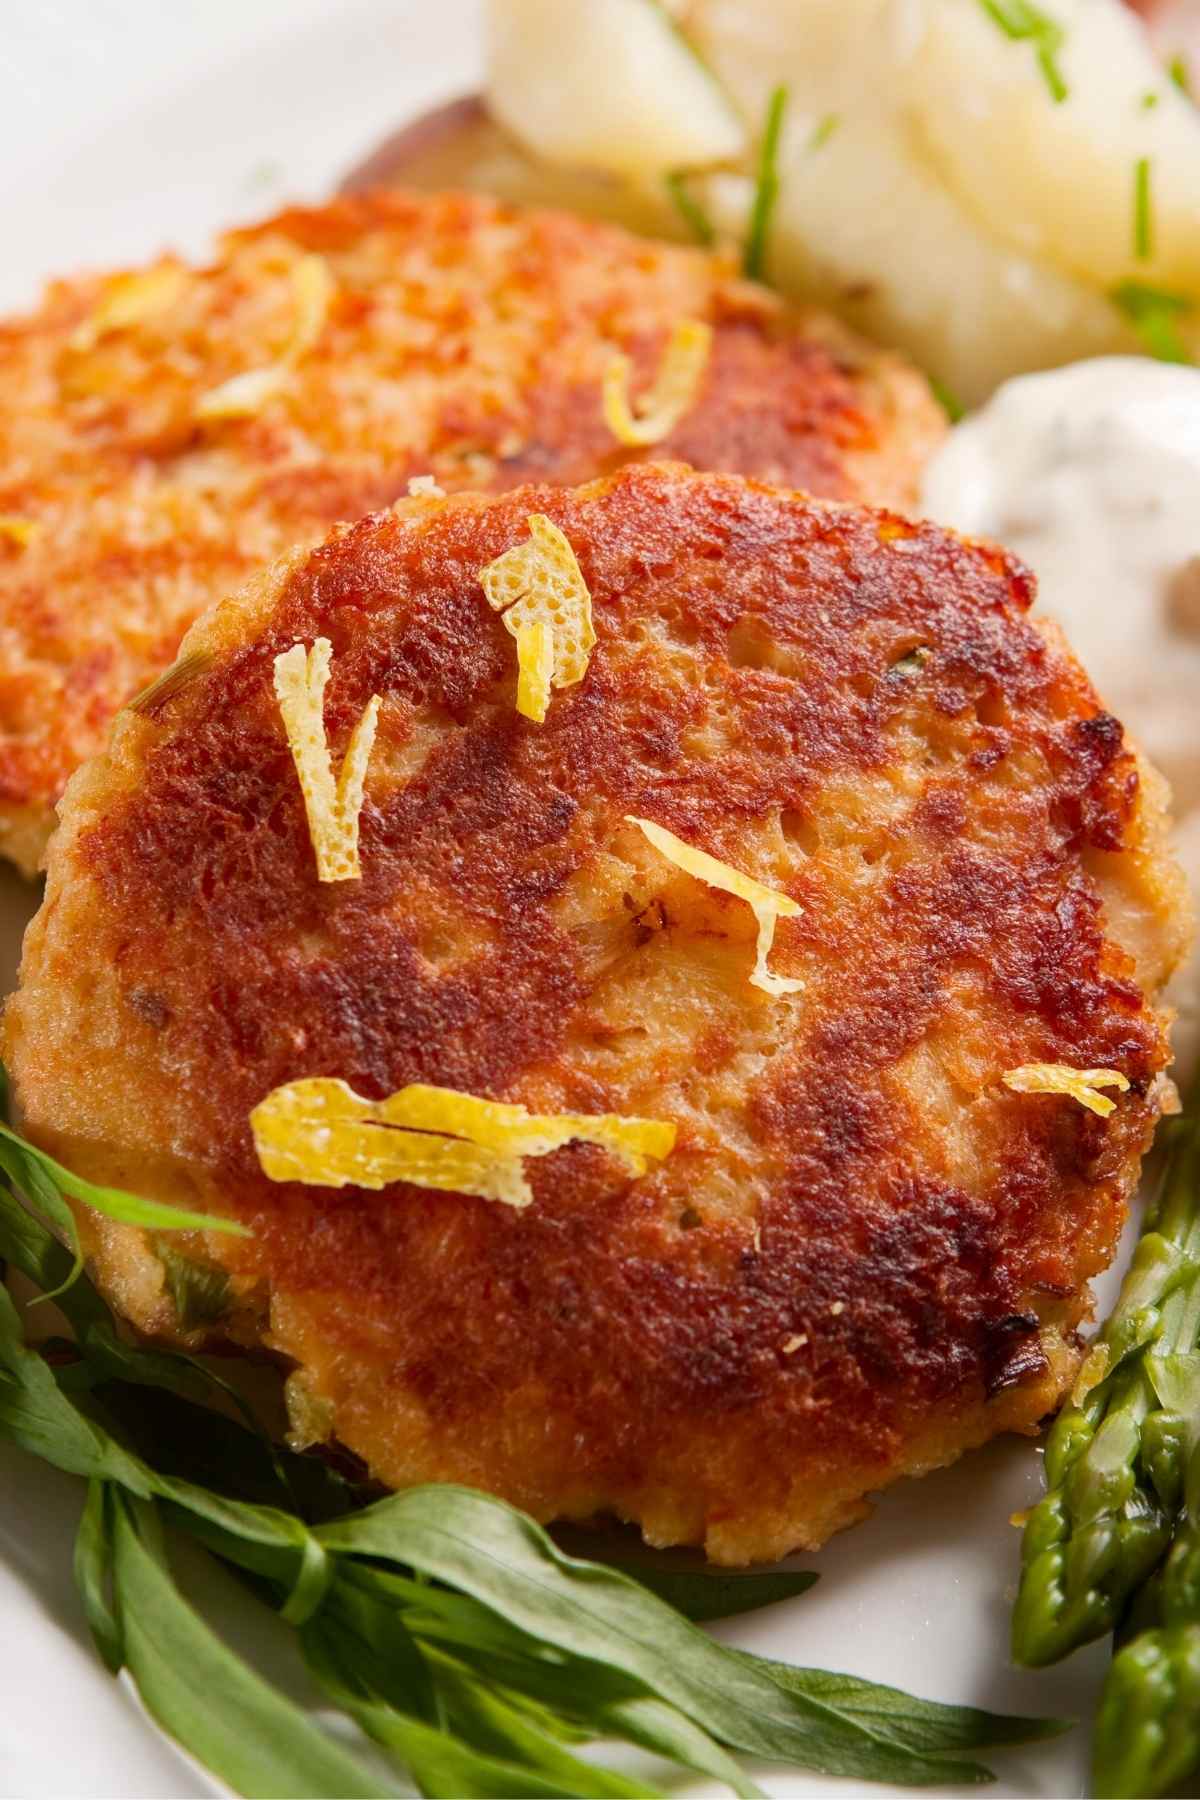 You’ll love the savory flavor of these Old Fashioned Salmon Patties. They’re cooked on the stovetop until crisp and delicious.